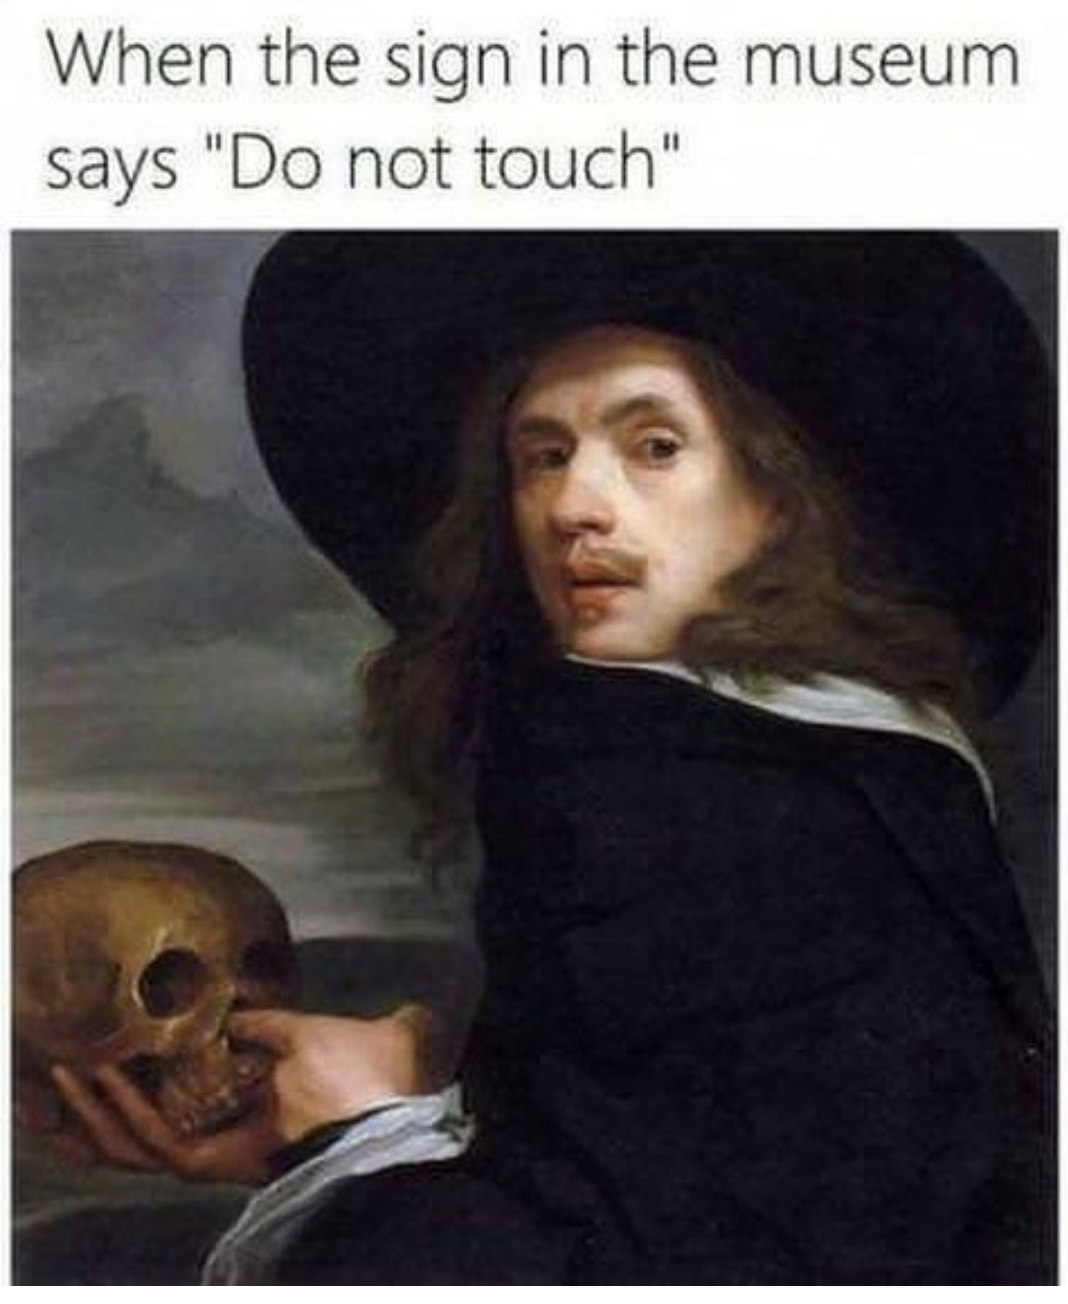 Do not touch.